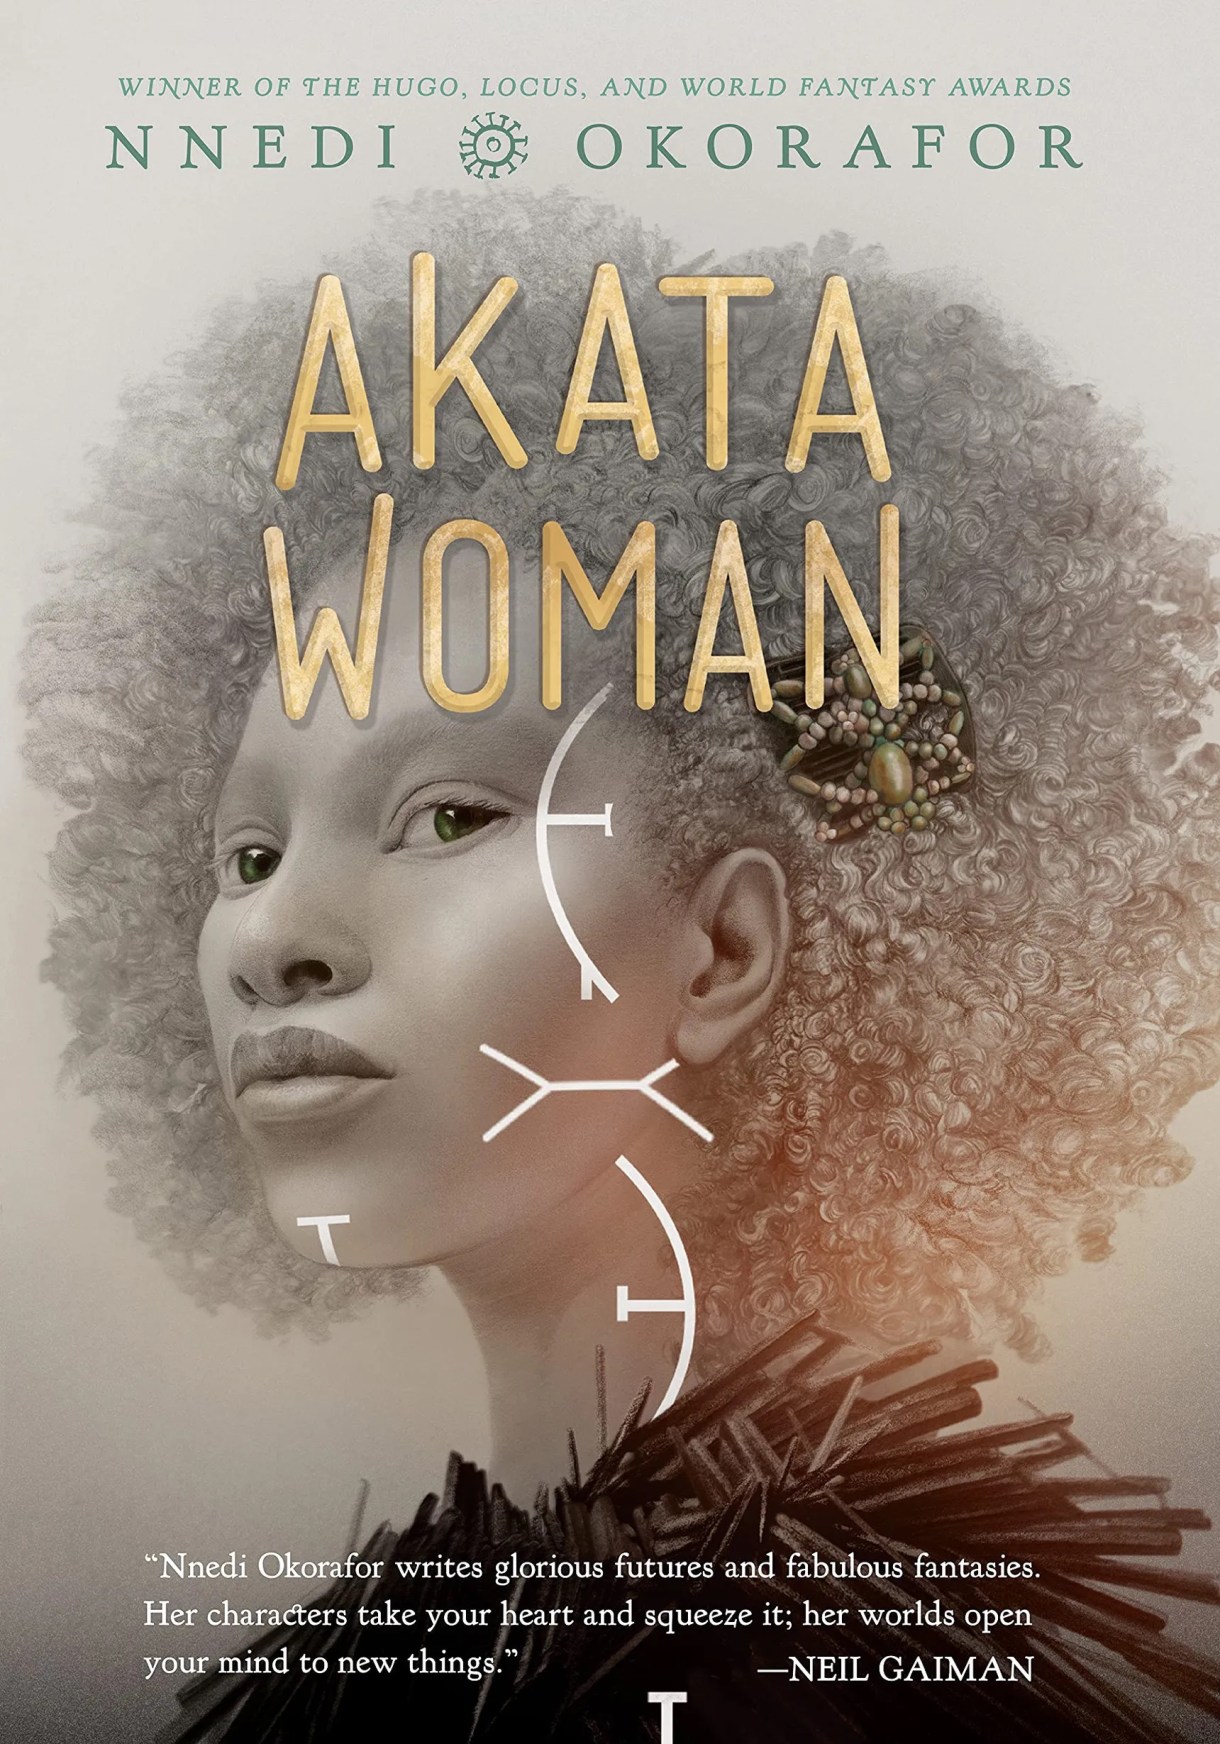 cover of Akata Woman featuring a Black girl in shades of gray with some kind of futuristic looking symbols in white on the cover